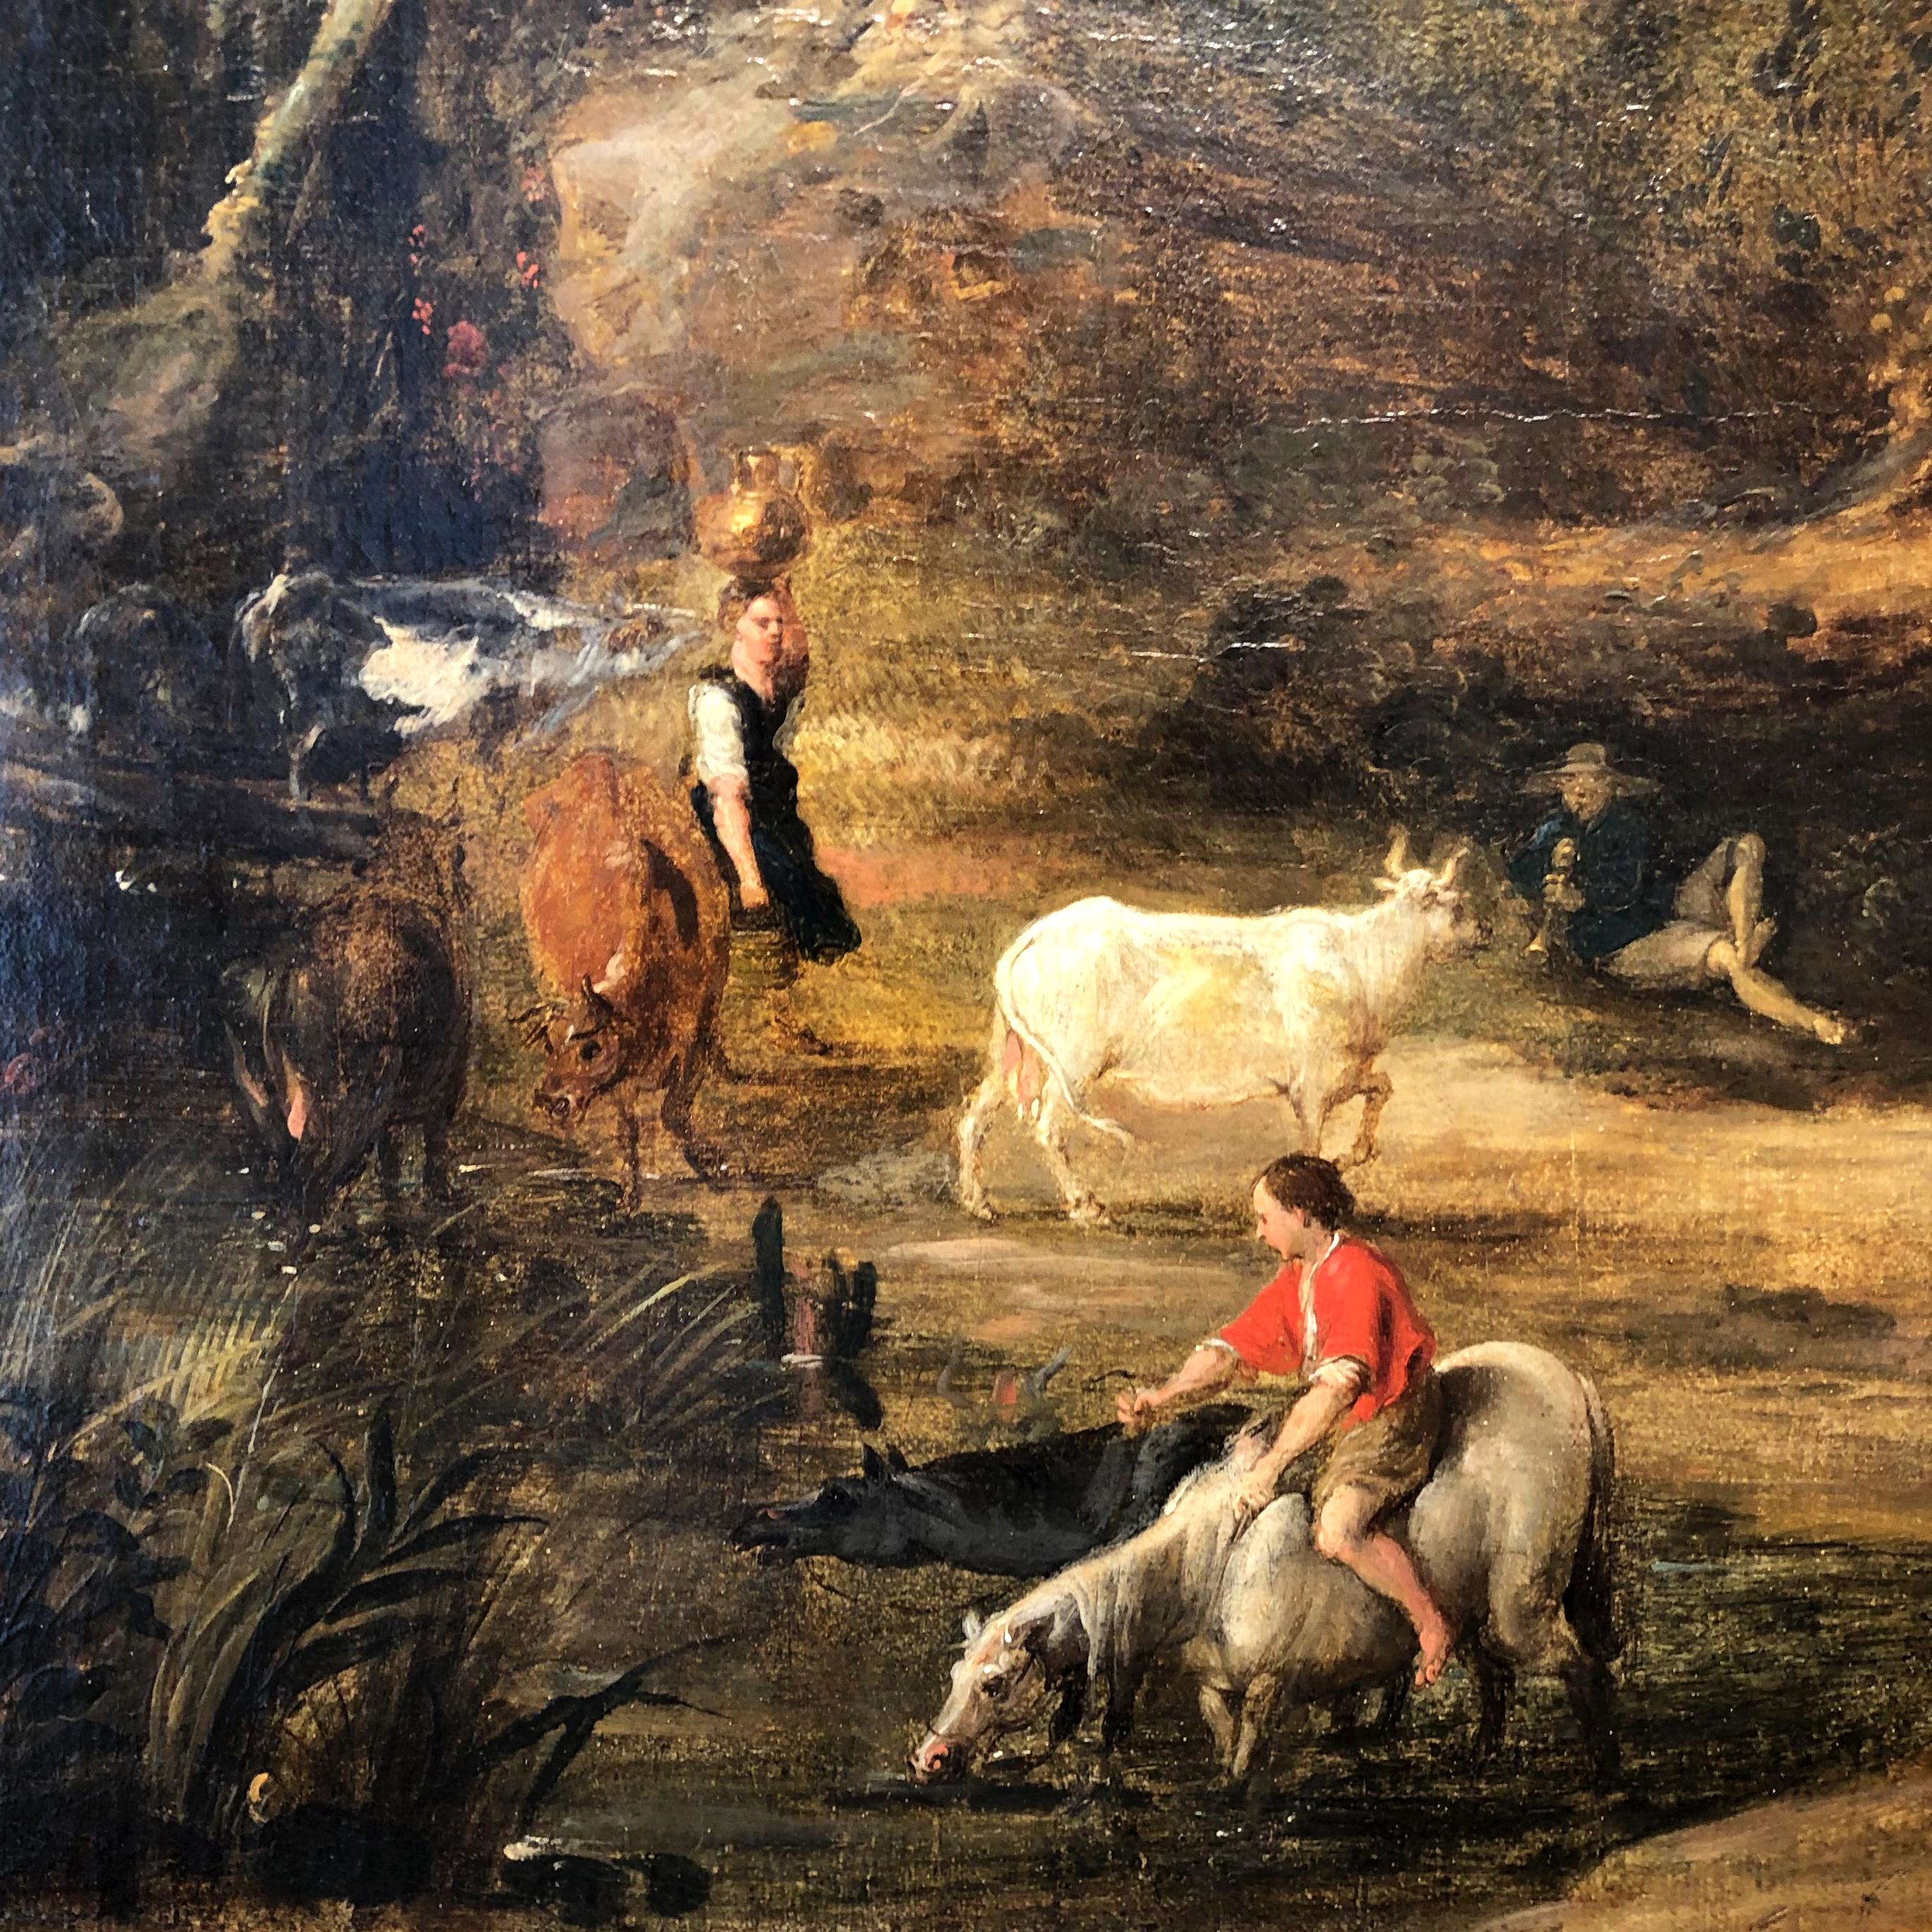 Flemish School, the Watering Hole, 17th Century Landscape and Figurative 1